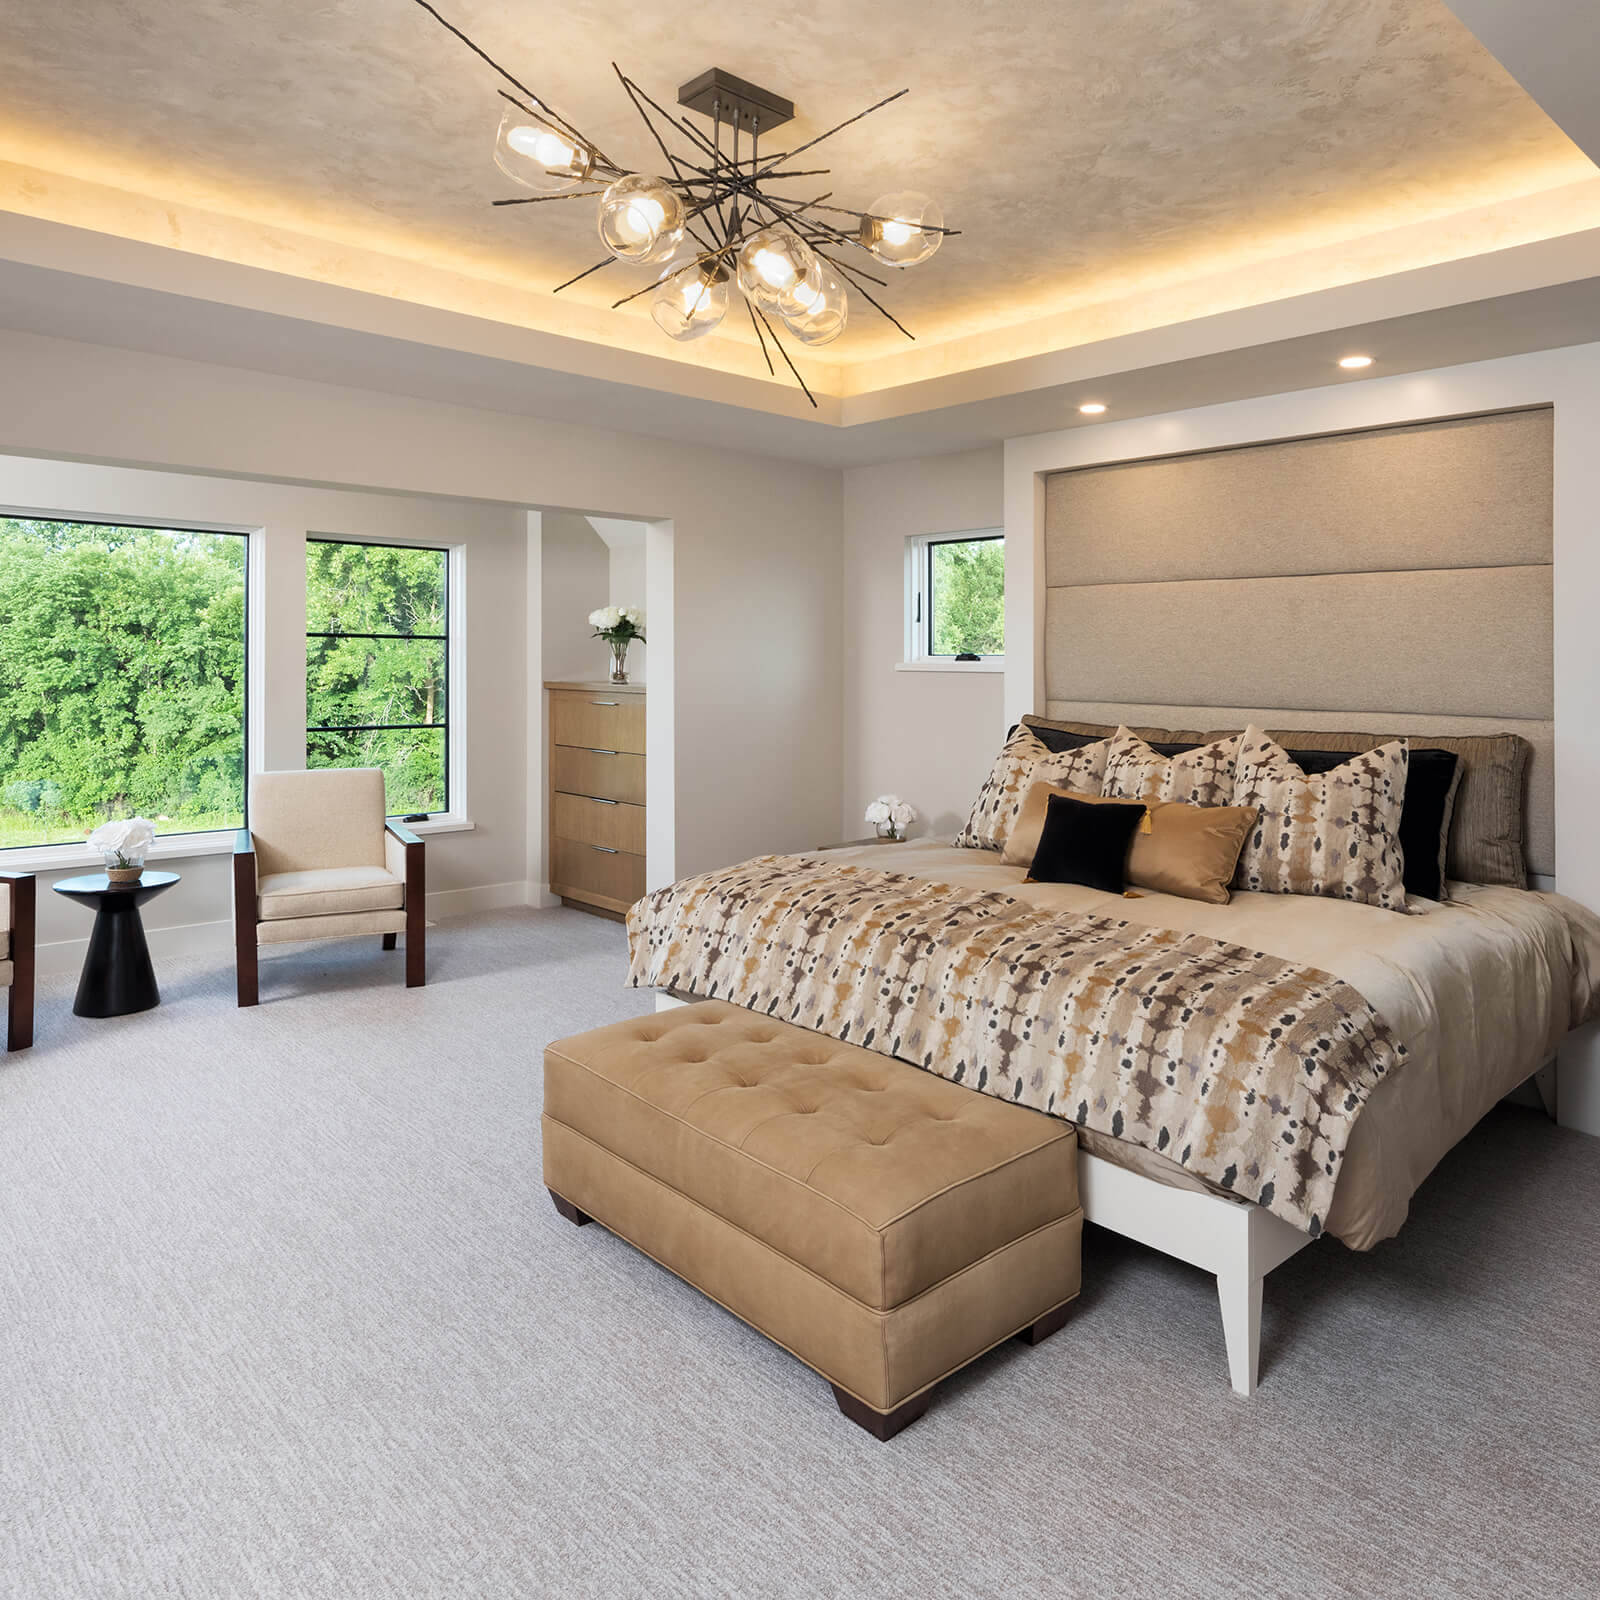 Large bedroom with Marvin Elevate Casement Windows and Elevate Direct Glaze Windows